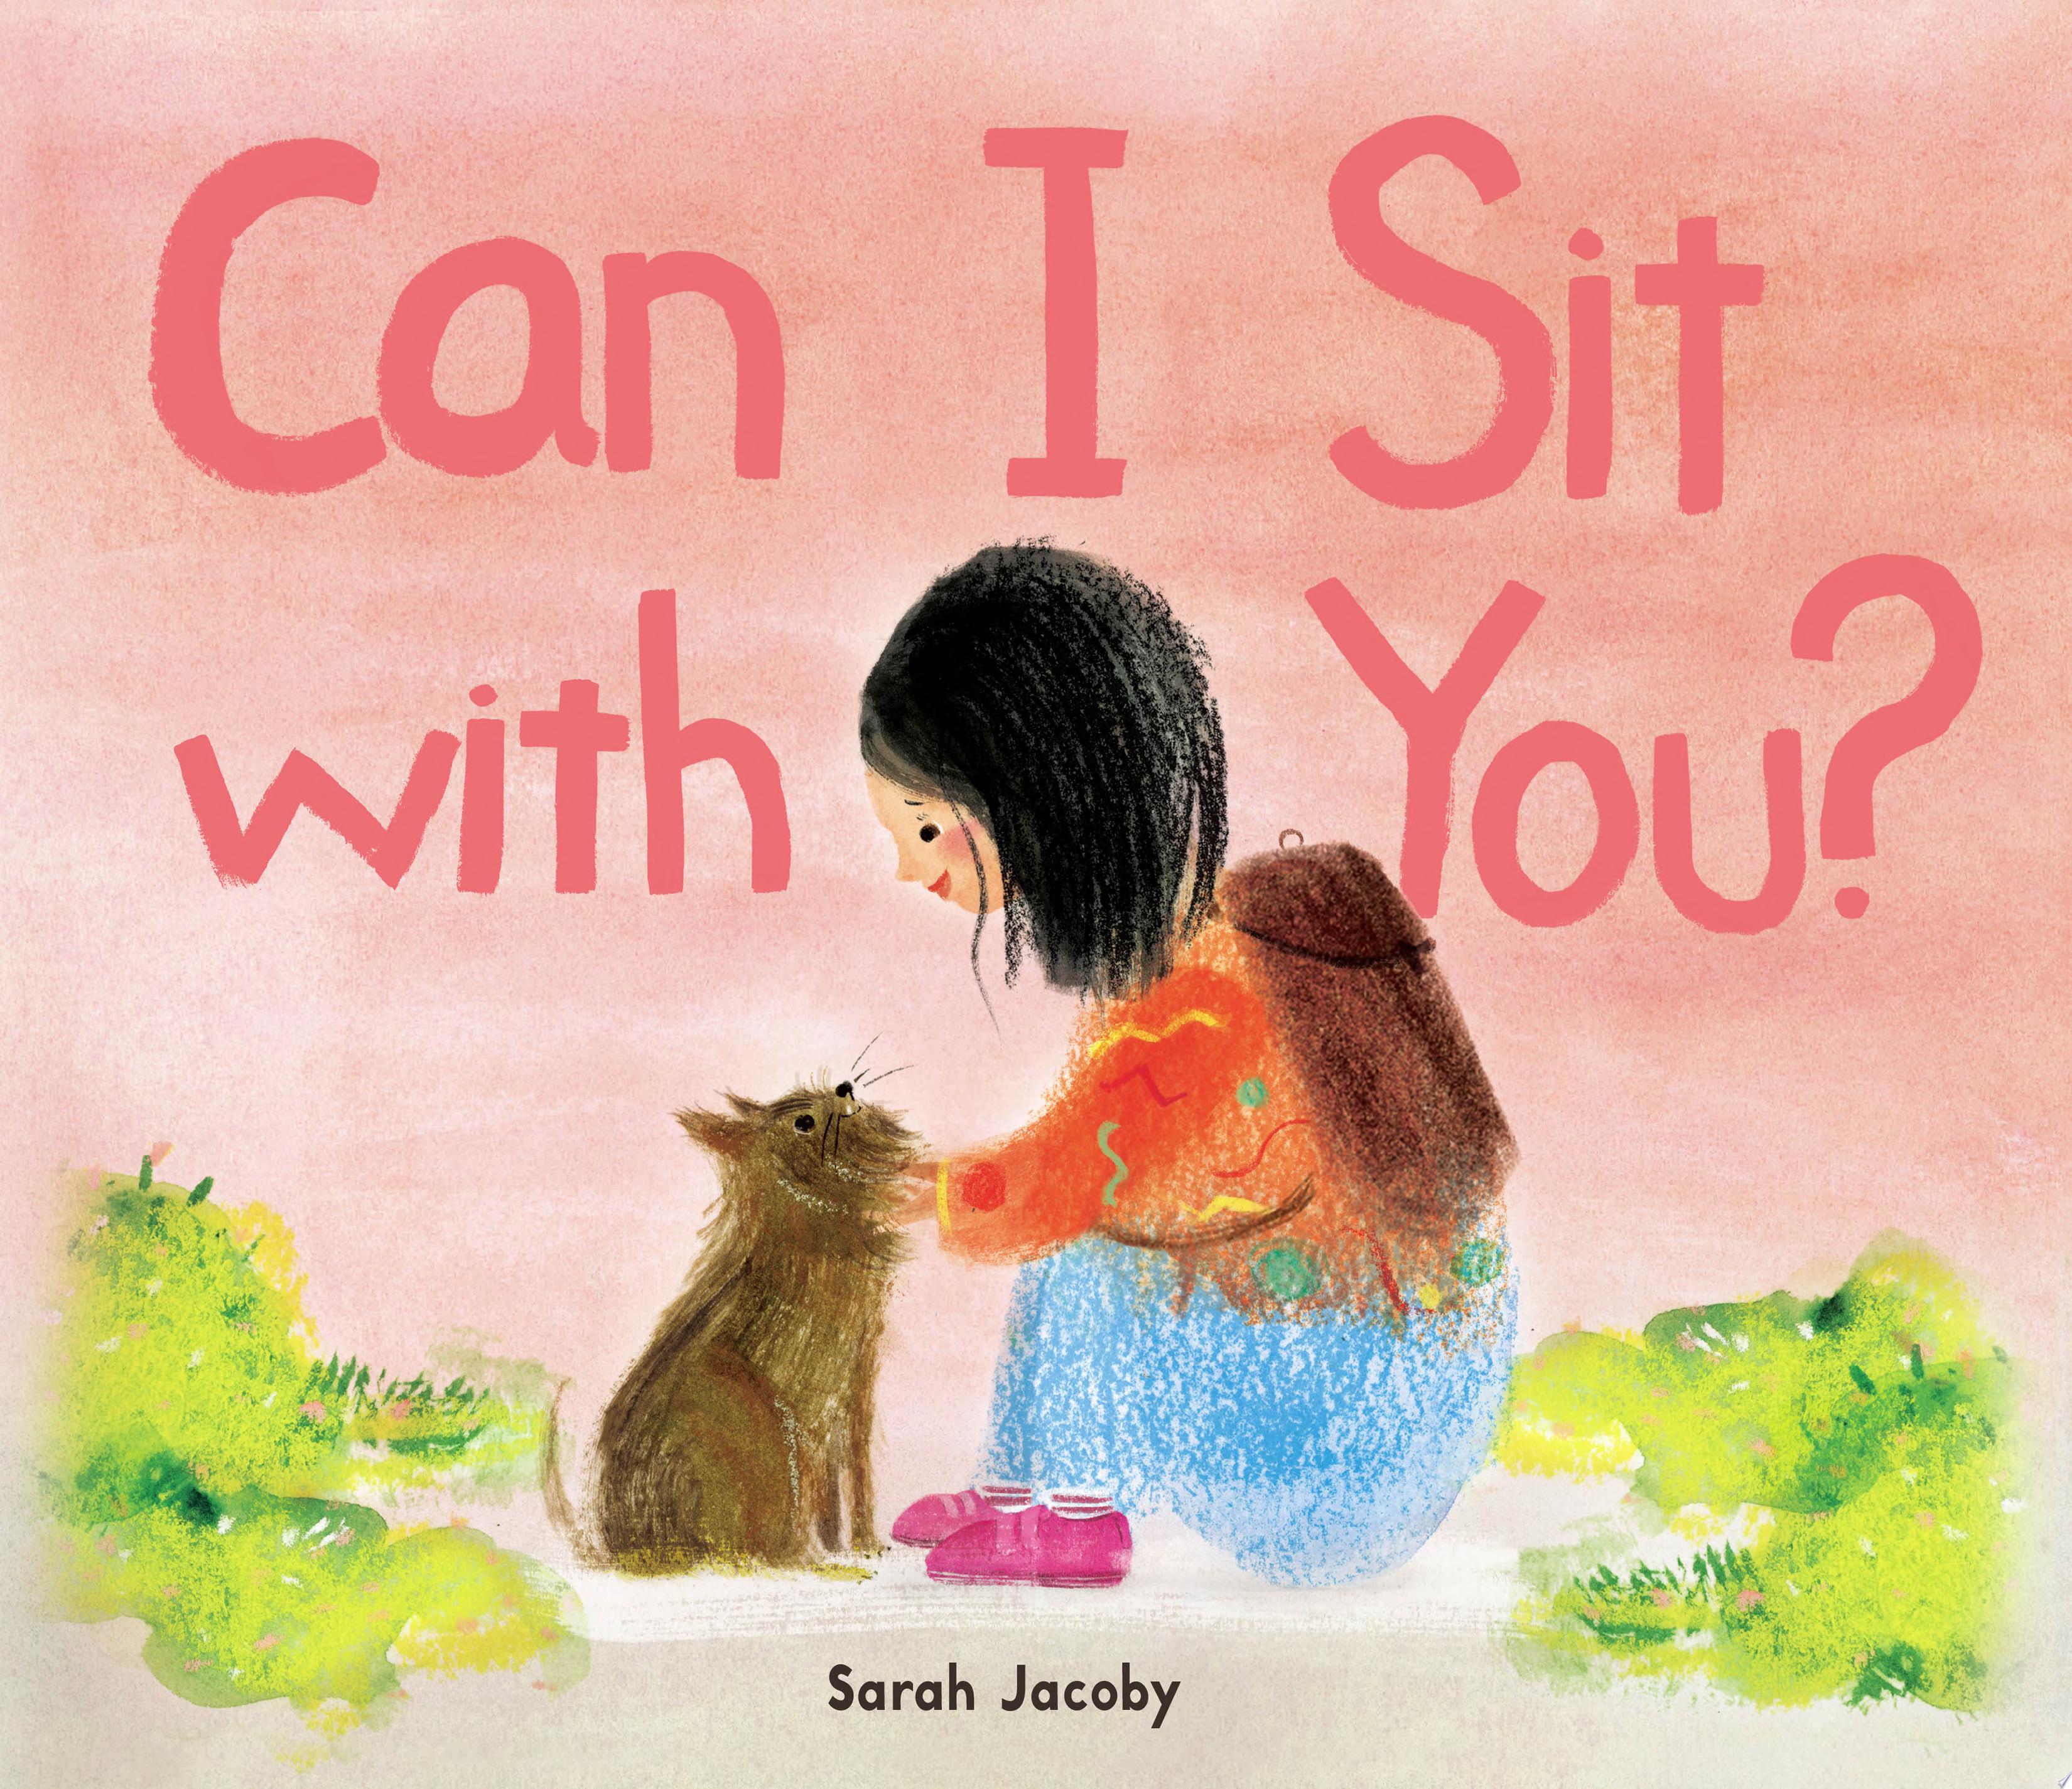 Image for "Can I Sit with You?"